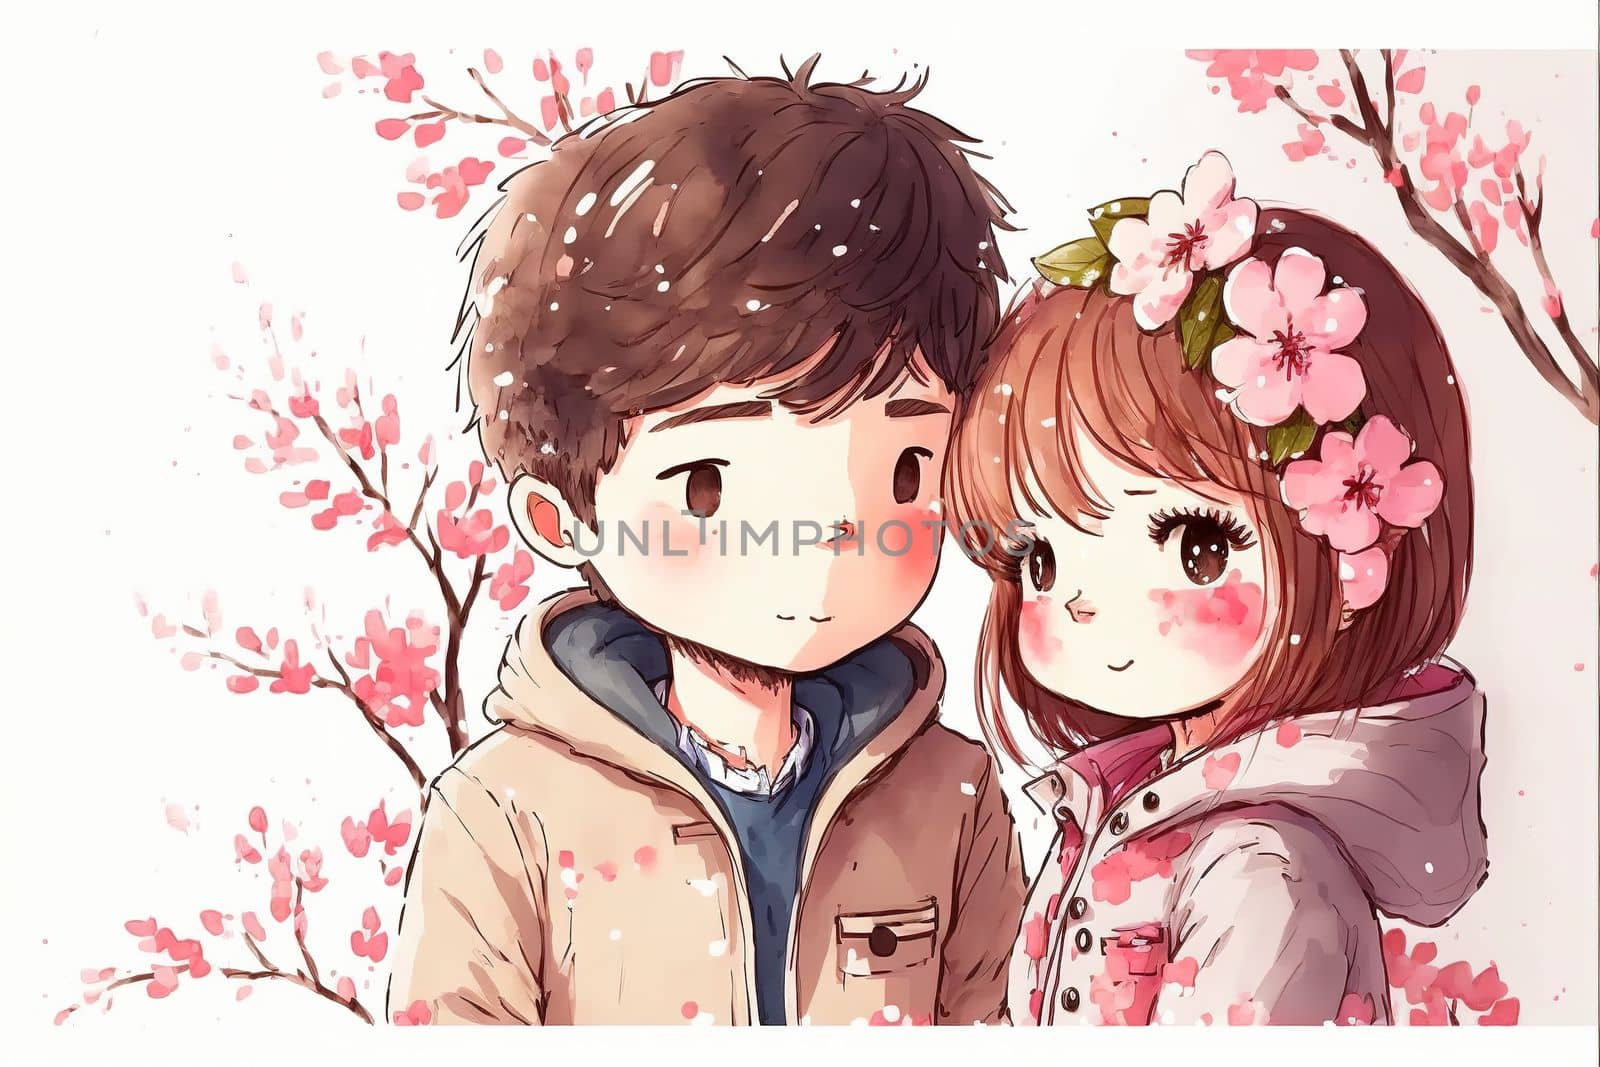 Cute boy and girl in love on romantic Valentine's day hand drawn cartoon style by biancoblue